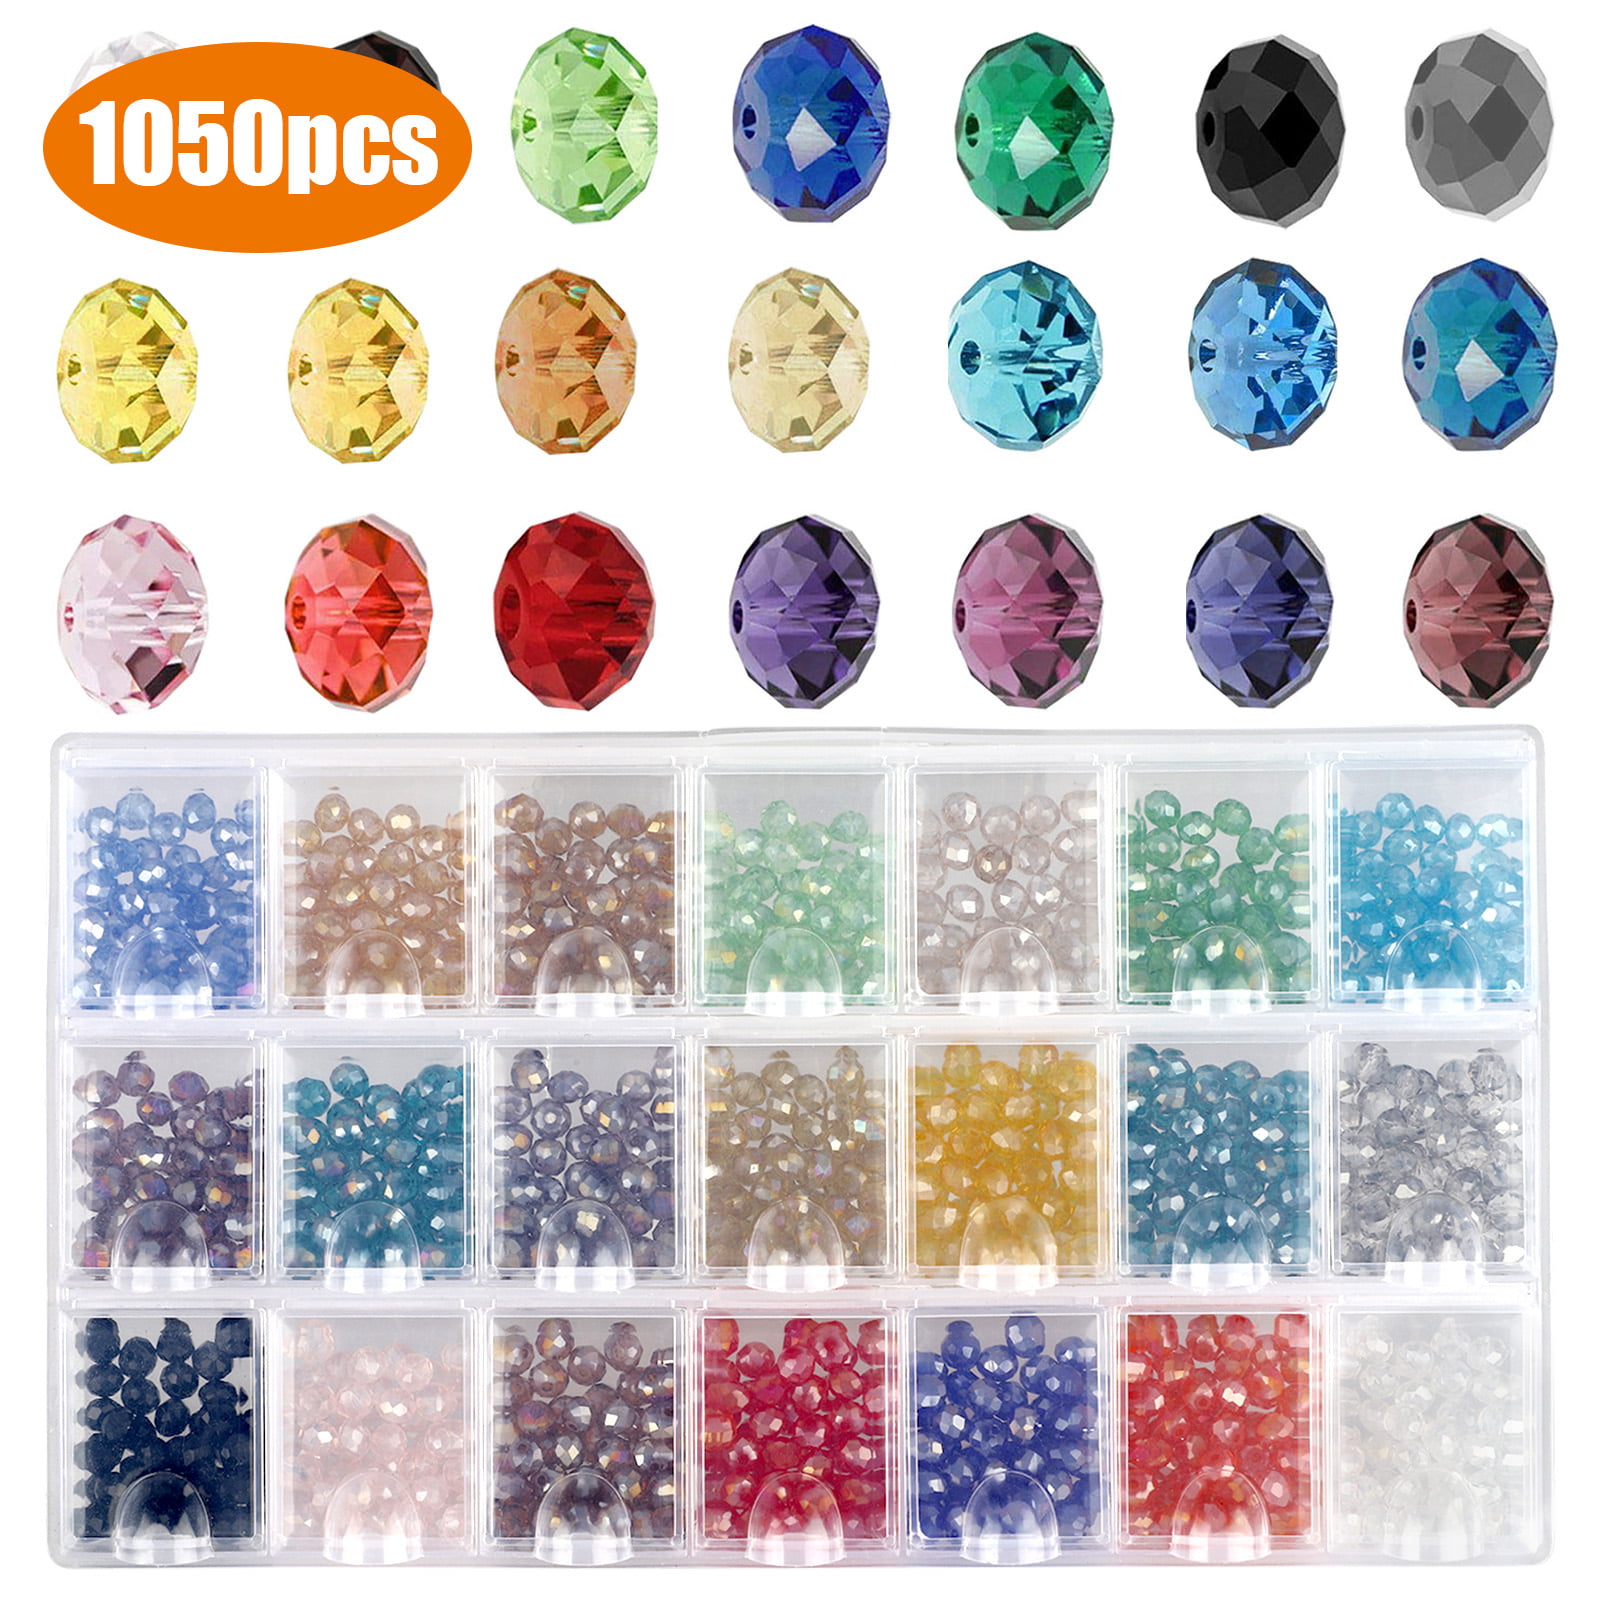 Wholesale 12mm Rondelle Faceted Crystal Glass Bead Loose Spacer Beads Findings 